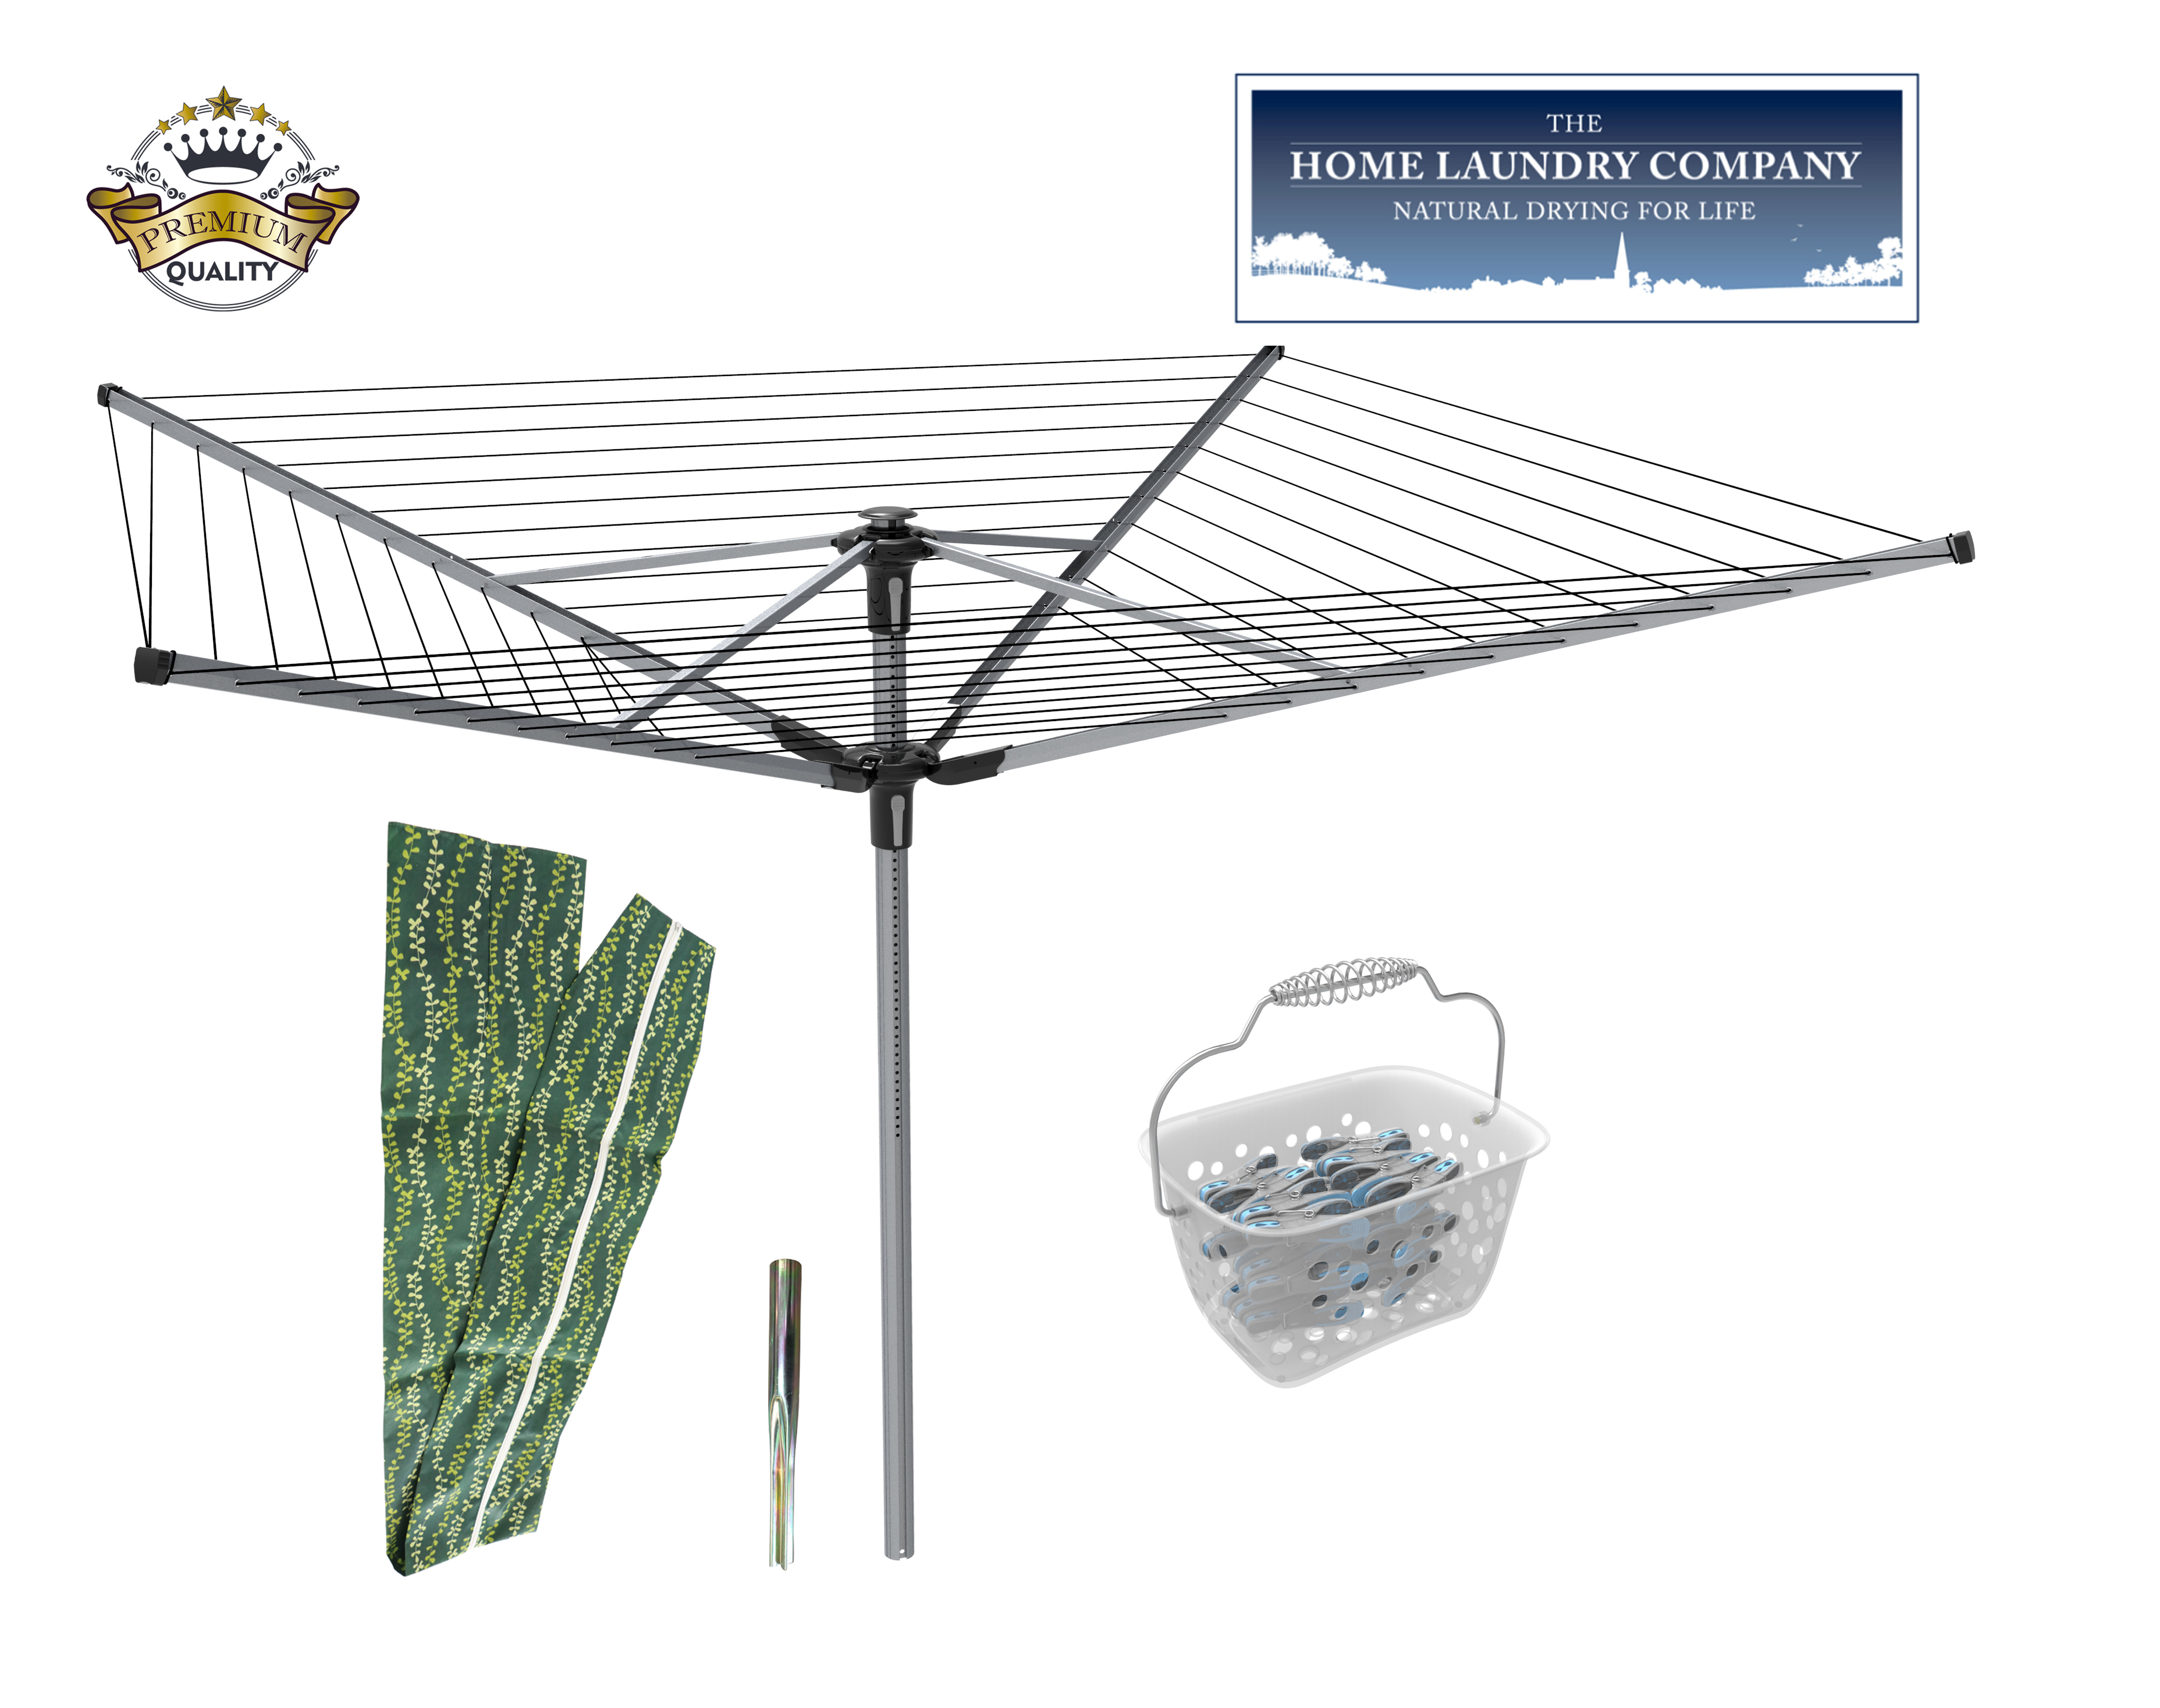 THE HOME LAUNDRY COMPANY, PREMIUM QUALITY - EXTRA-LARGE 60M Multi-Height Rotary Washing Line - FREE Metal Spike & Cover Worth £23. HIGH QUALITY 3 YEAR GUARANTEE *FREE BASKET & PEGS WORTH £7.20* ~ limited time only